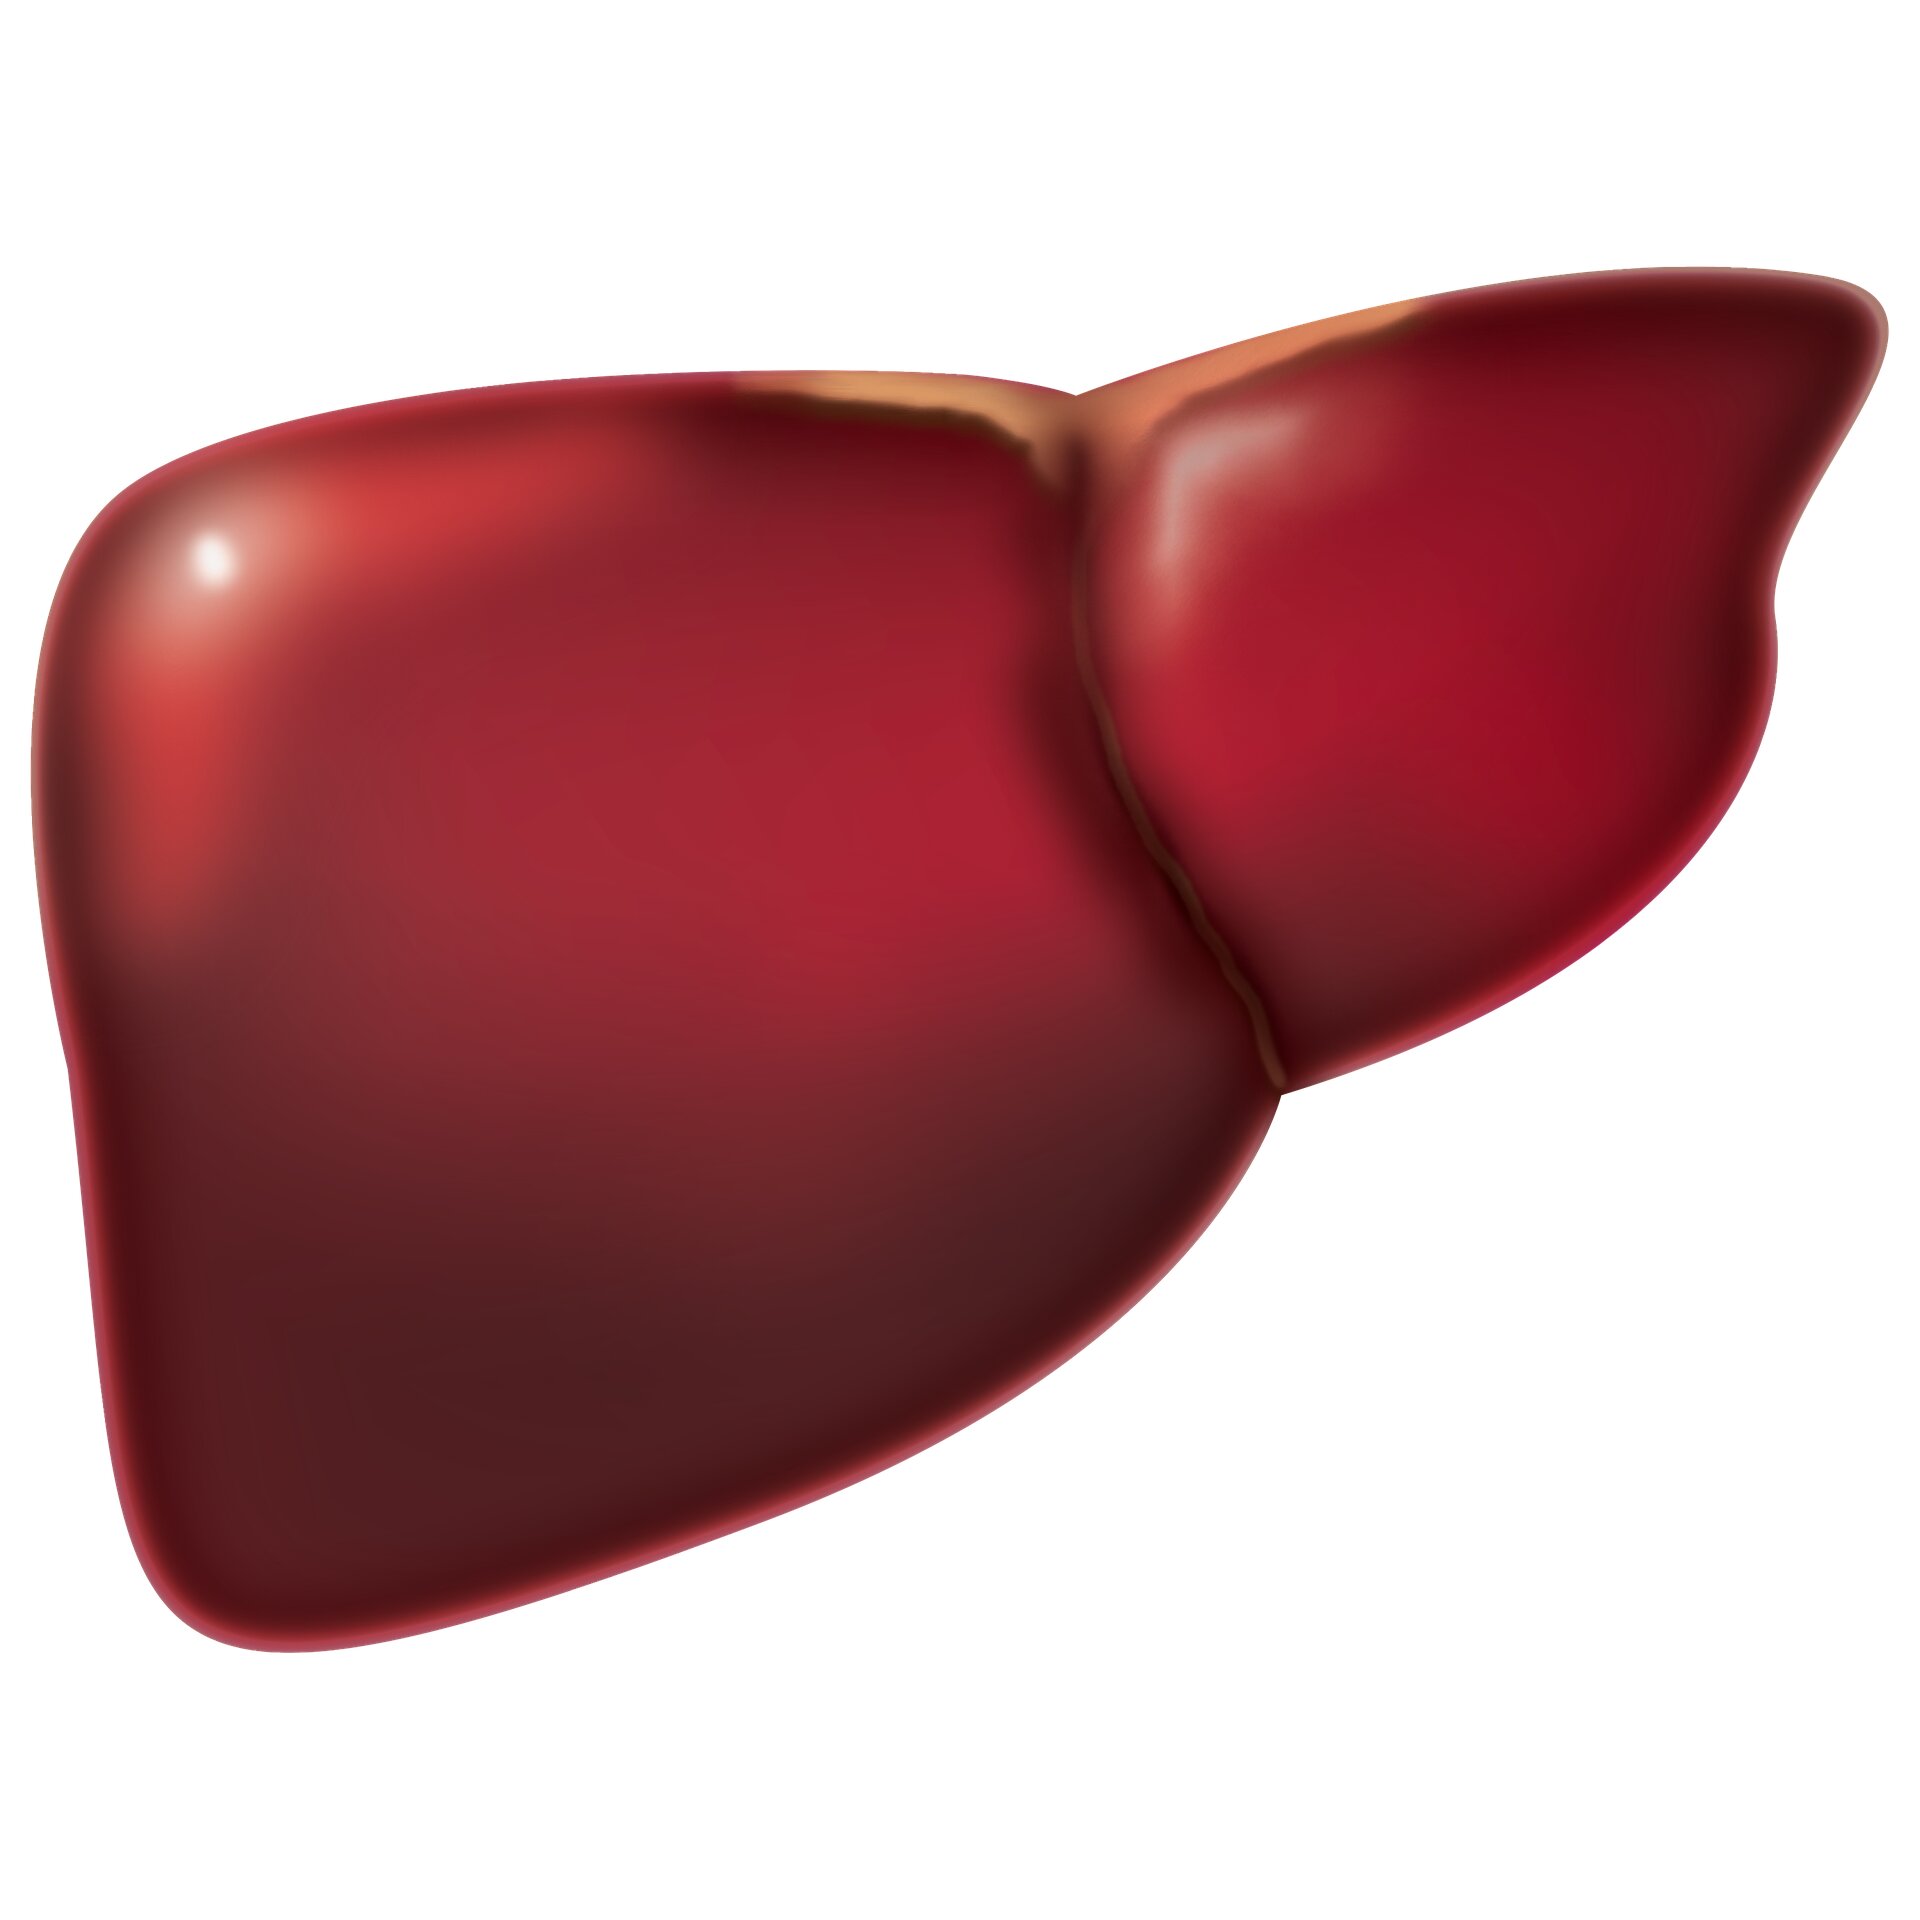 Study identifies new drug target for preventing fatty liver disease